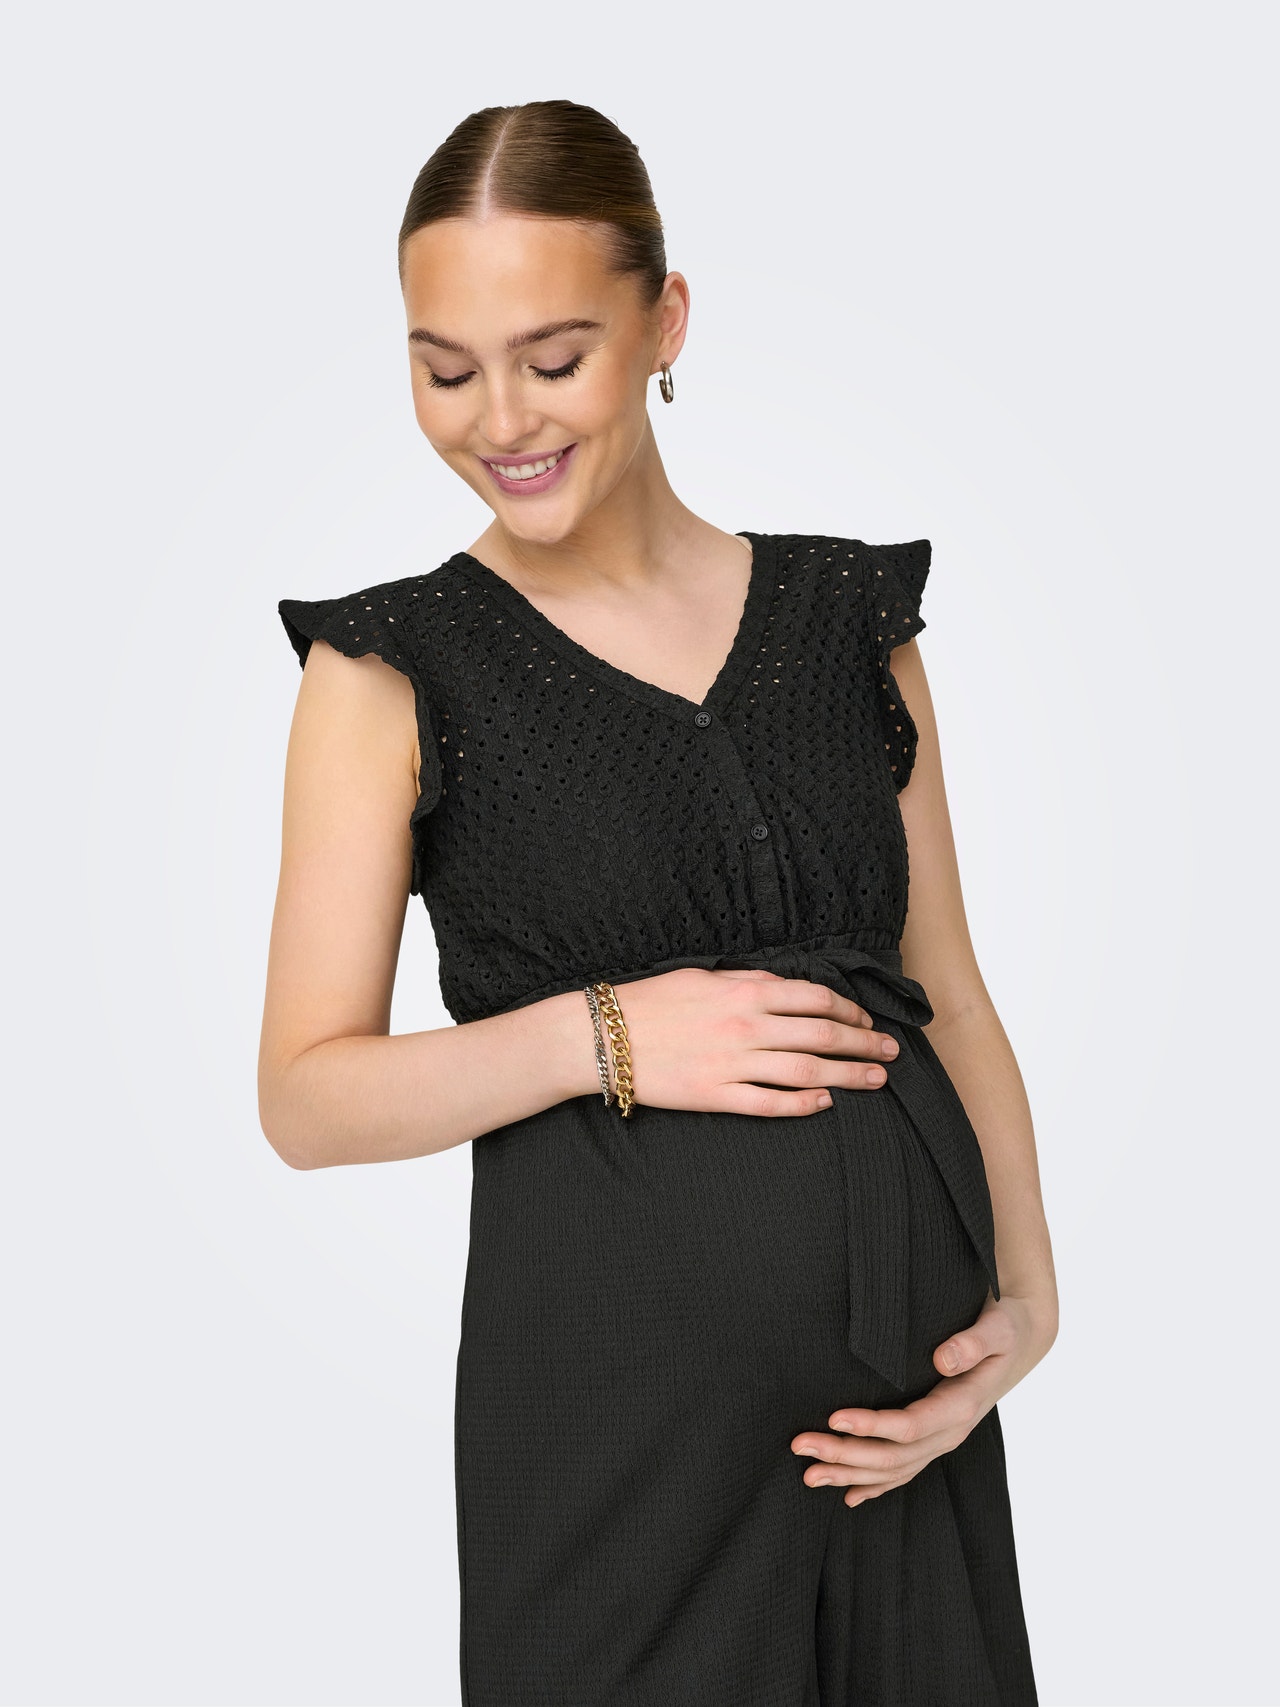 ONLY Maternity Jumpsuit -Black - 15331635